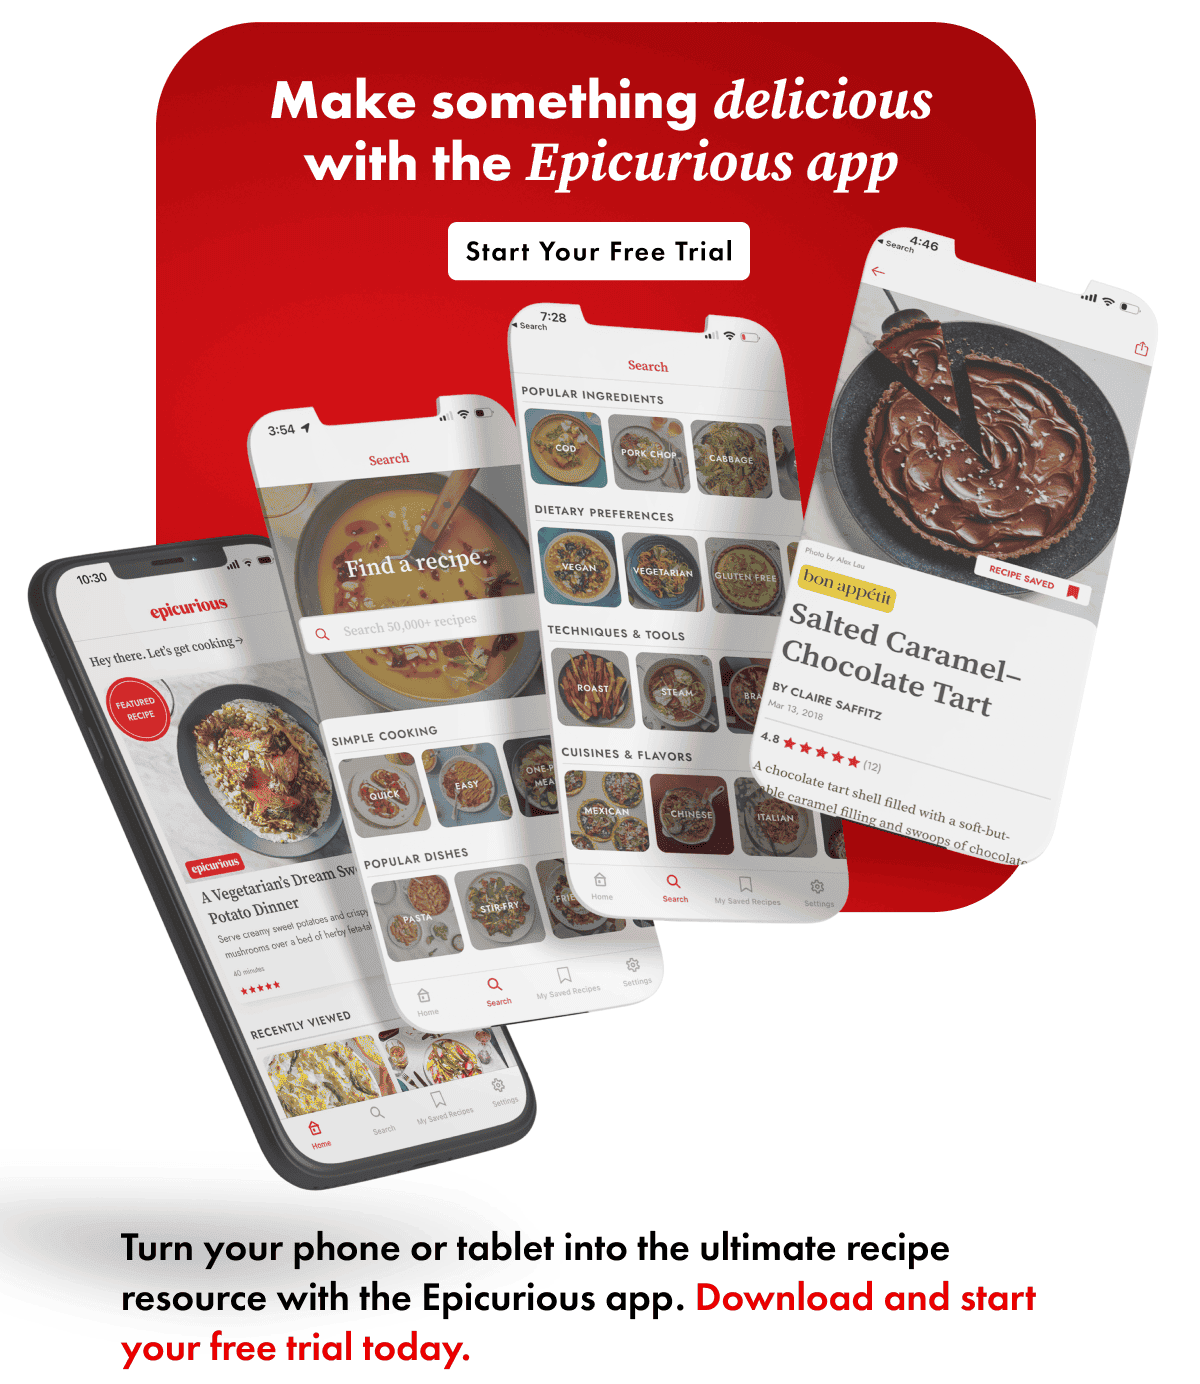 Make something delicious with the Epicurious app. Start your free Trial. Turn your phone or tablet into the ultimate recipe resource with the Epicurious app. Download and start your free trial today.